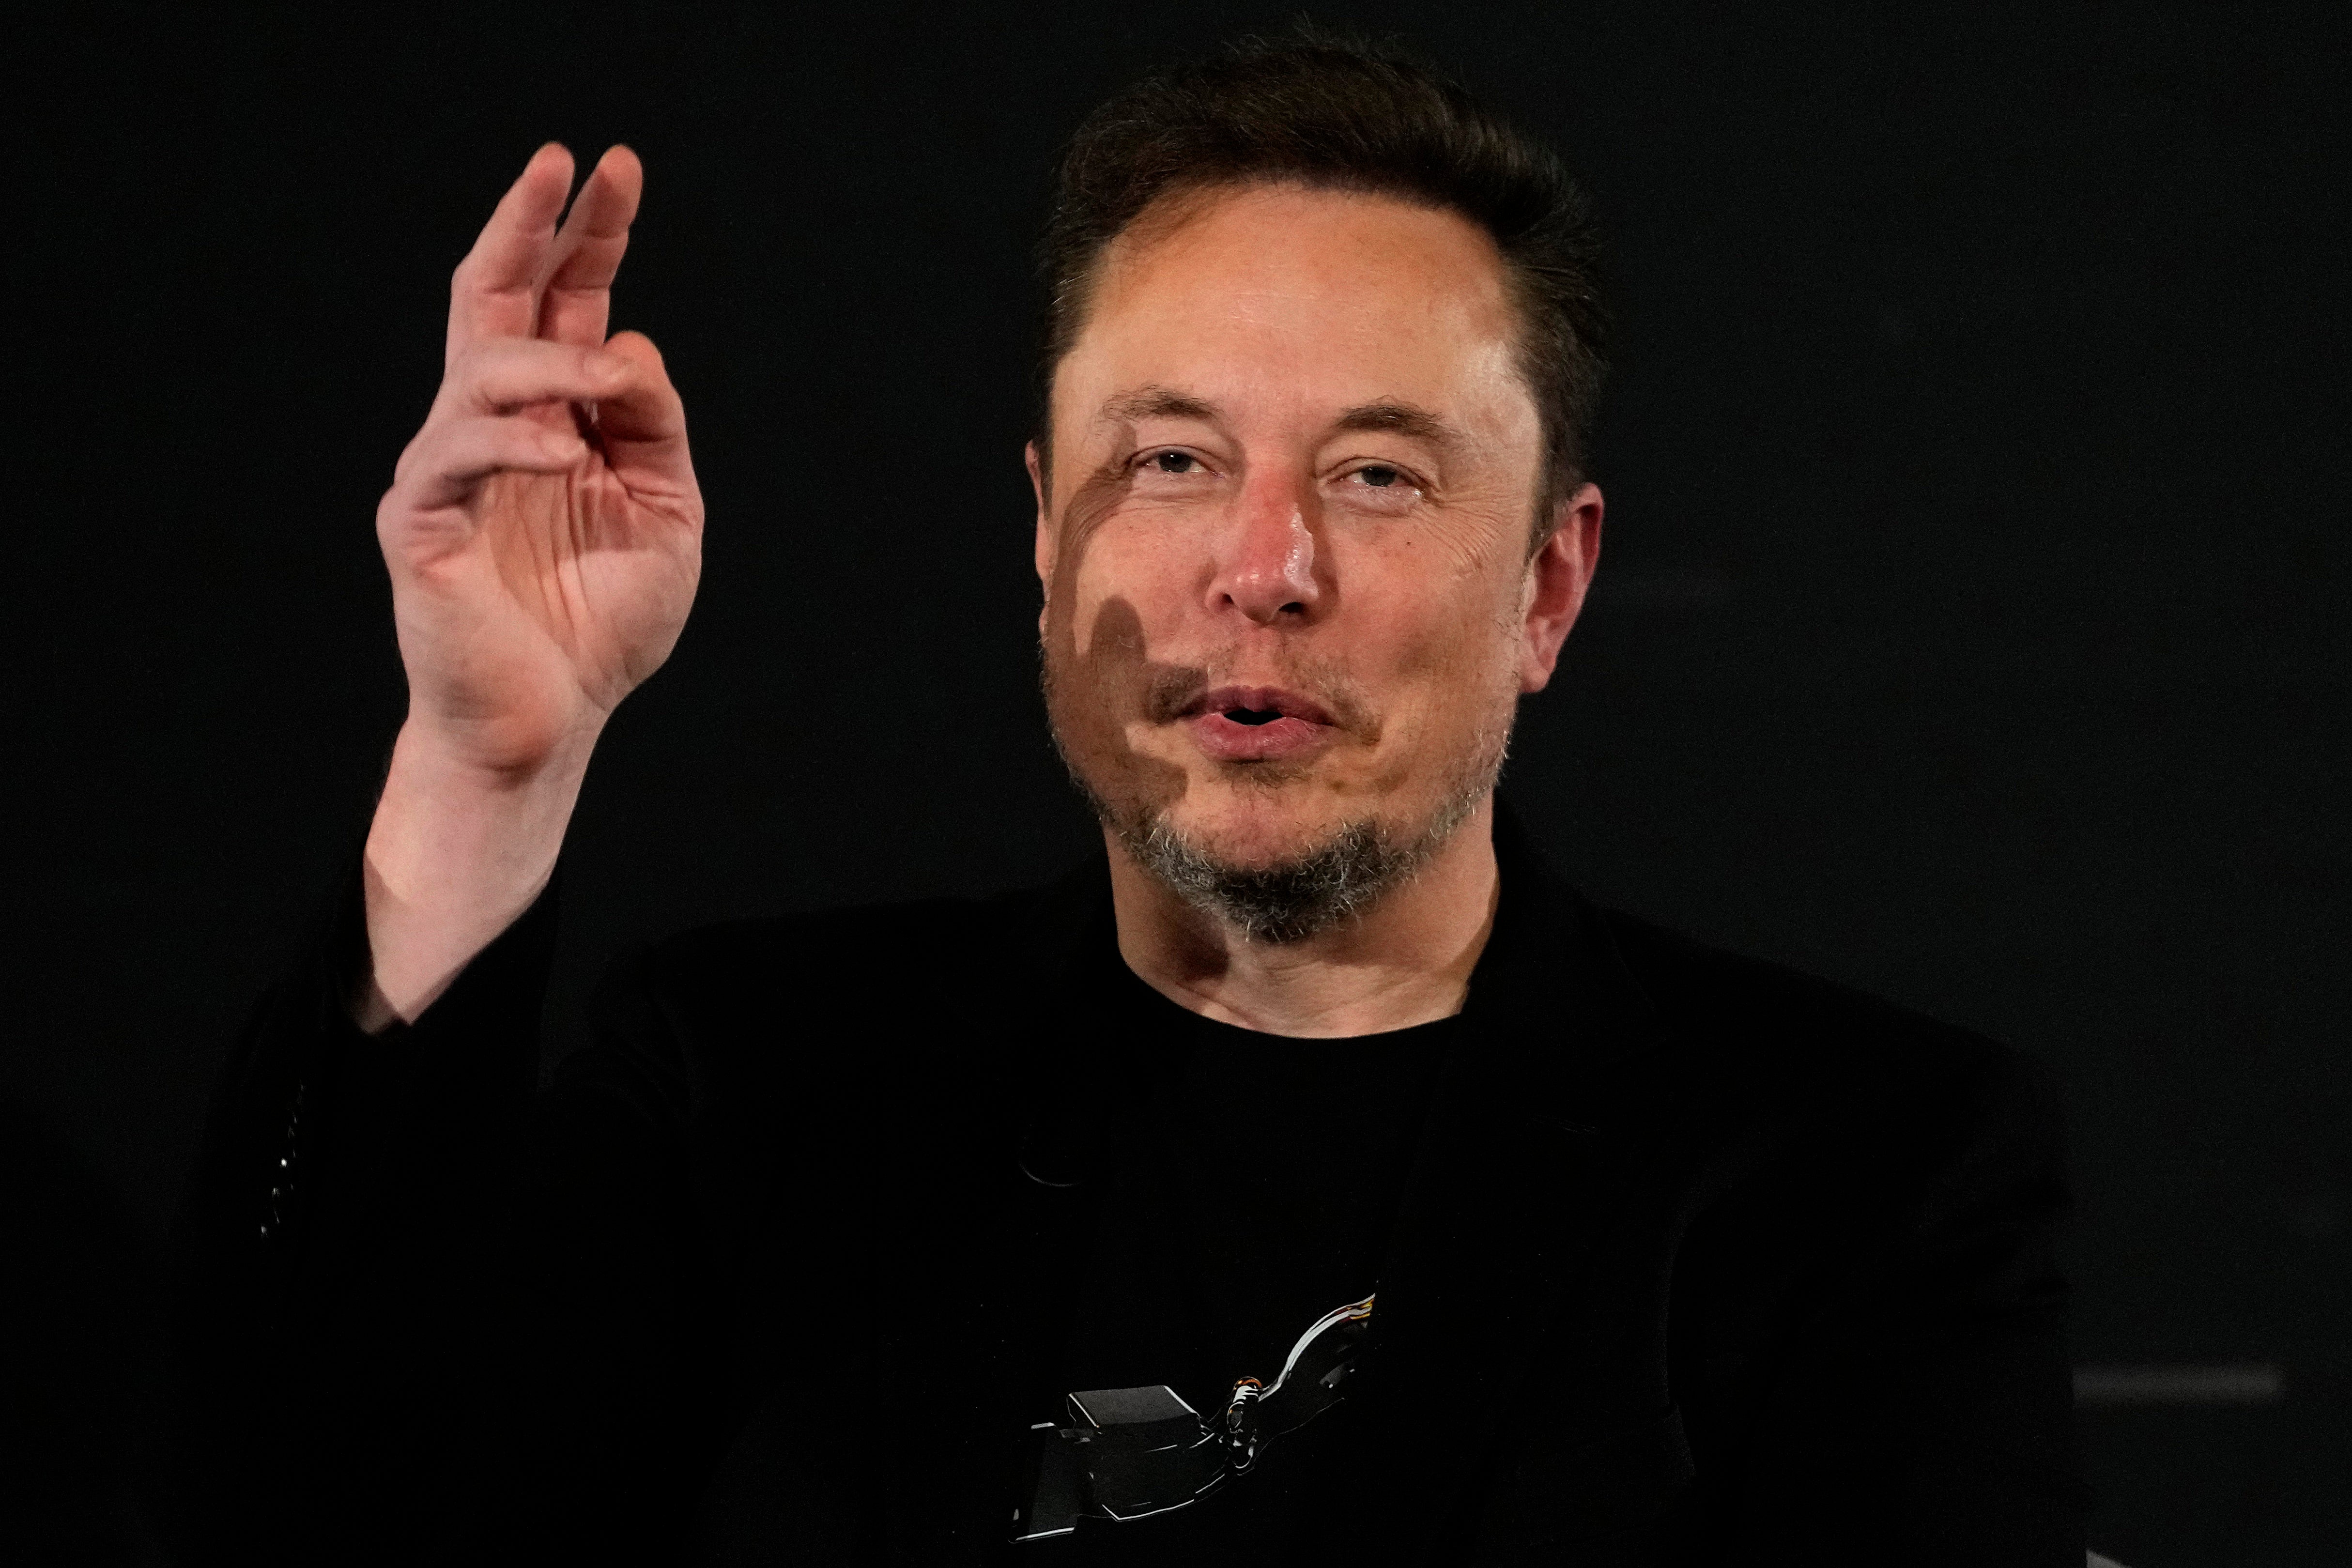 Elon Musk is among the world’s top five richest billionaires, according to Forbes